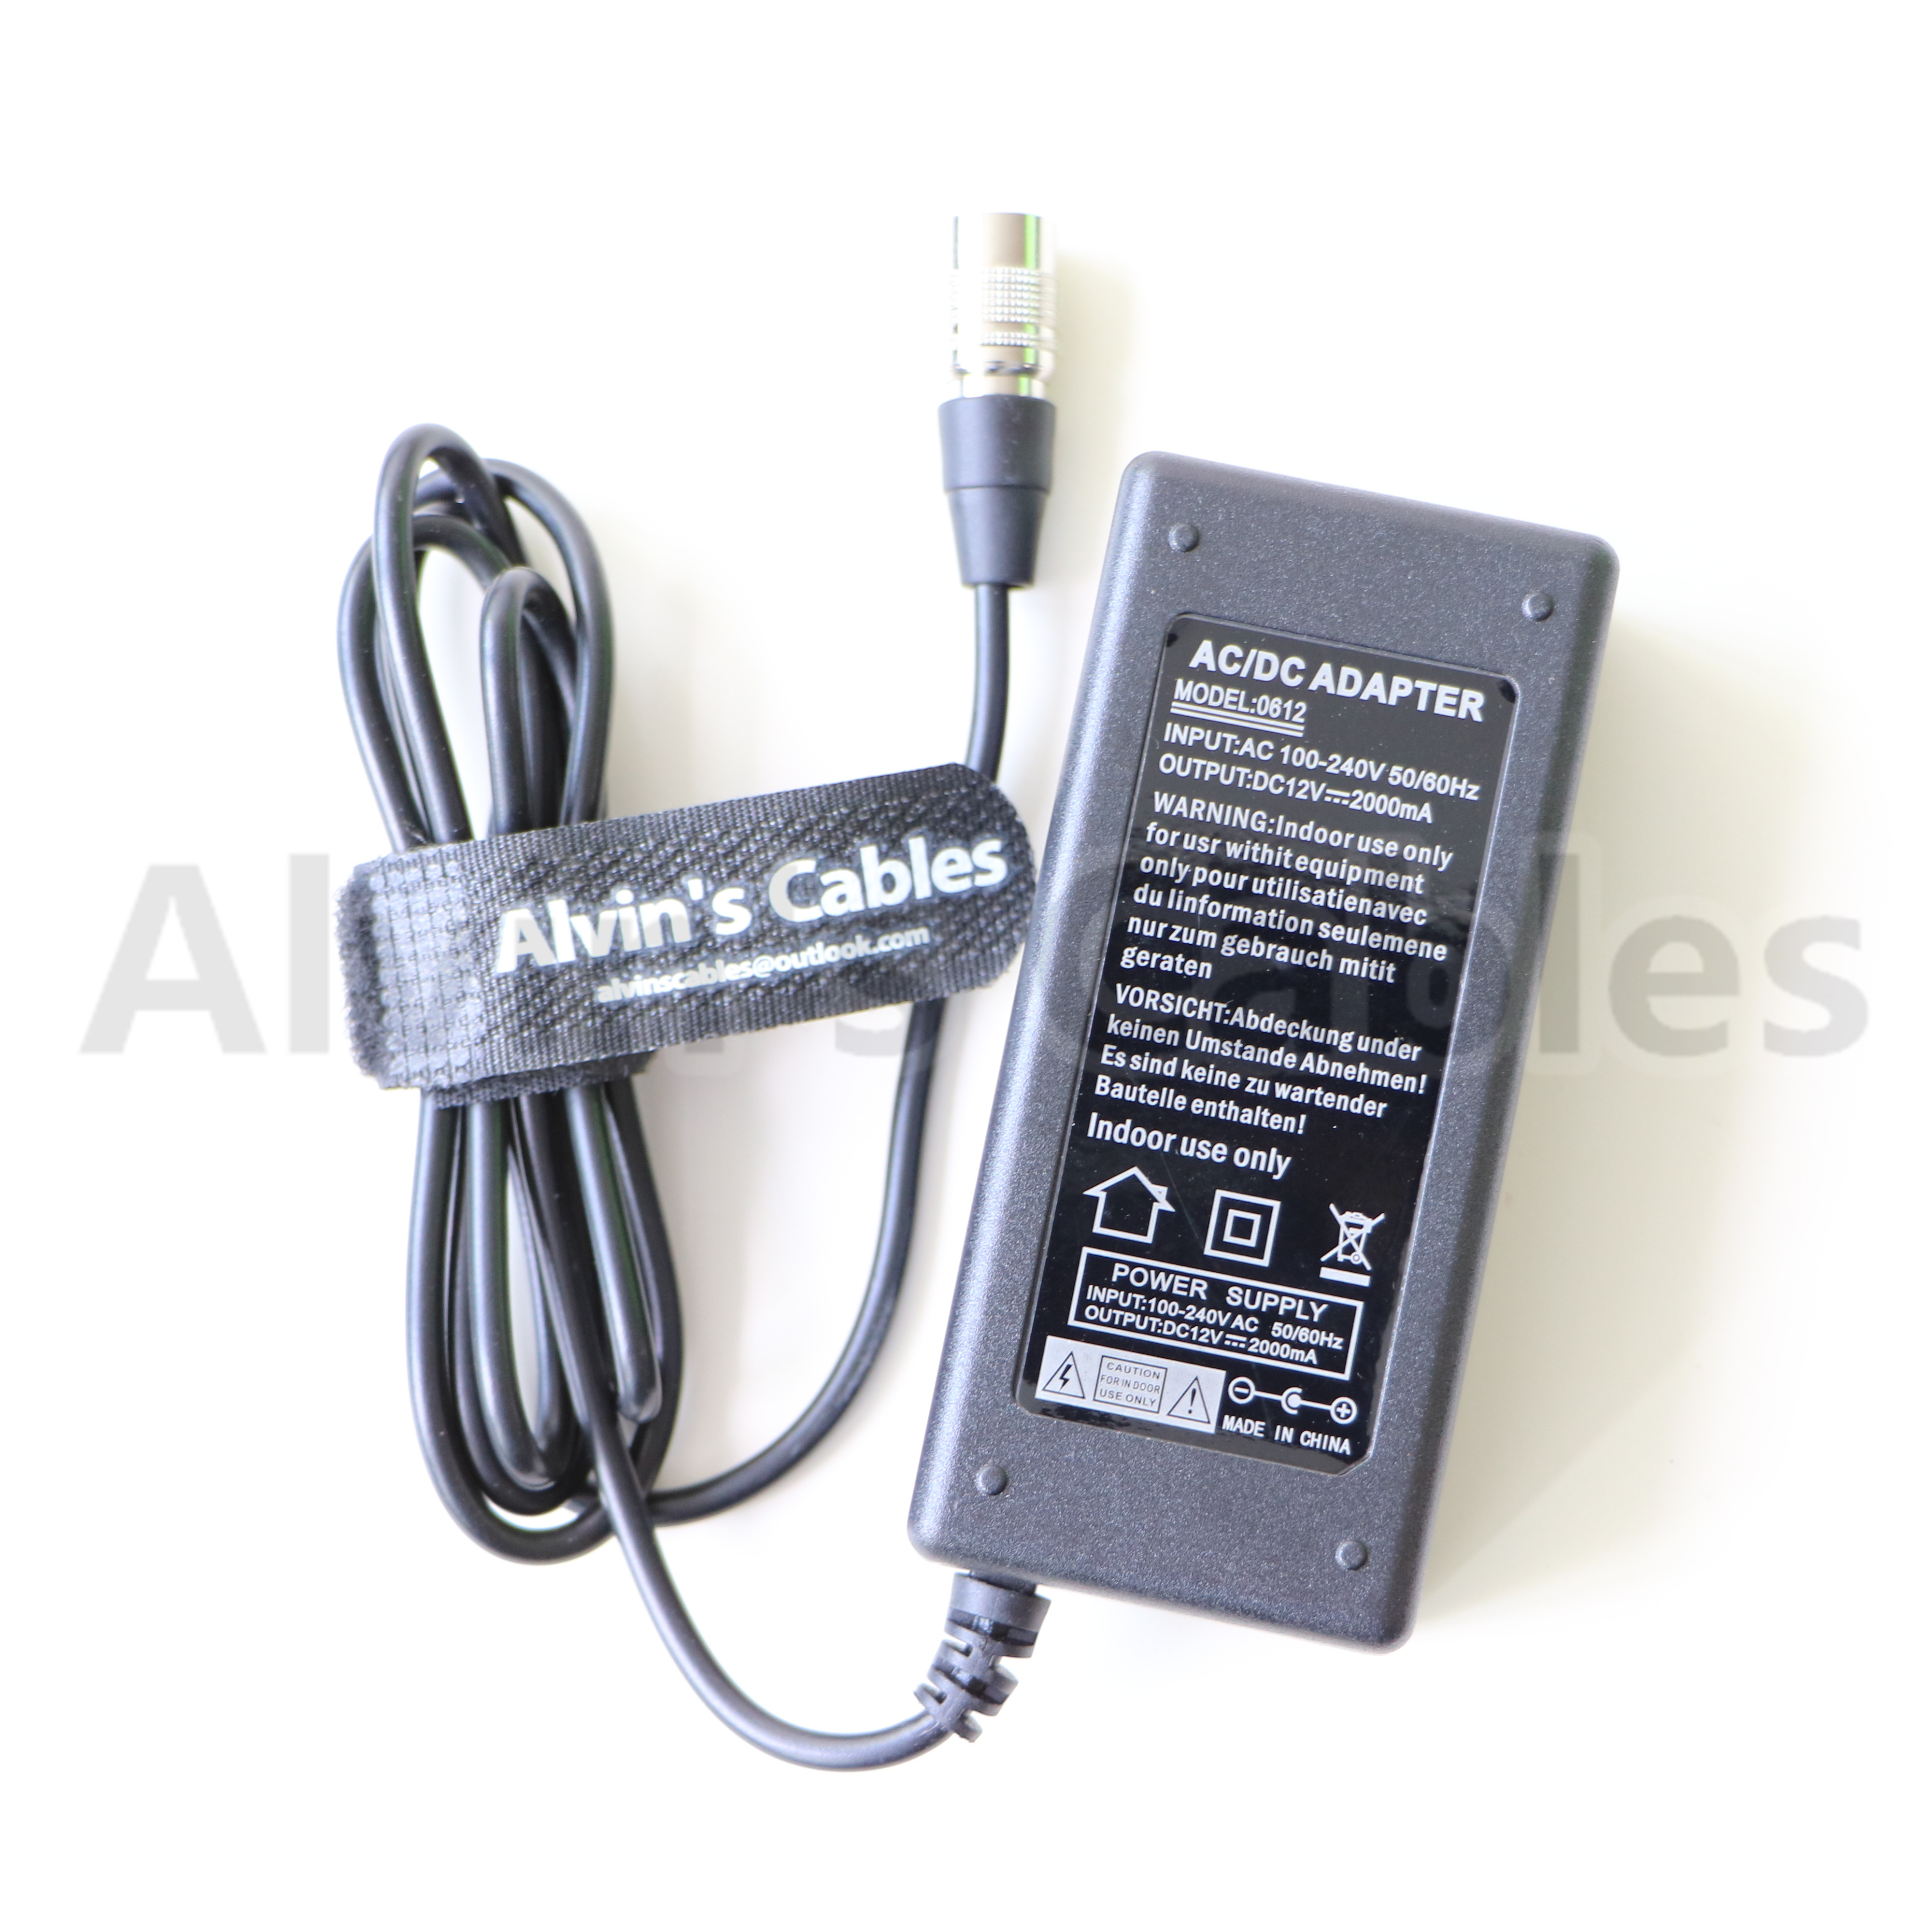 Alvins Cables AC to 4 Pin Hirose Male 12V 2A Power Adapter for Sound Devices ZAXCOM Sony